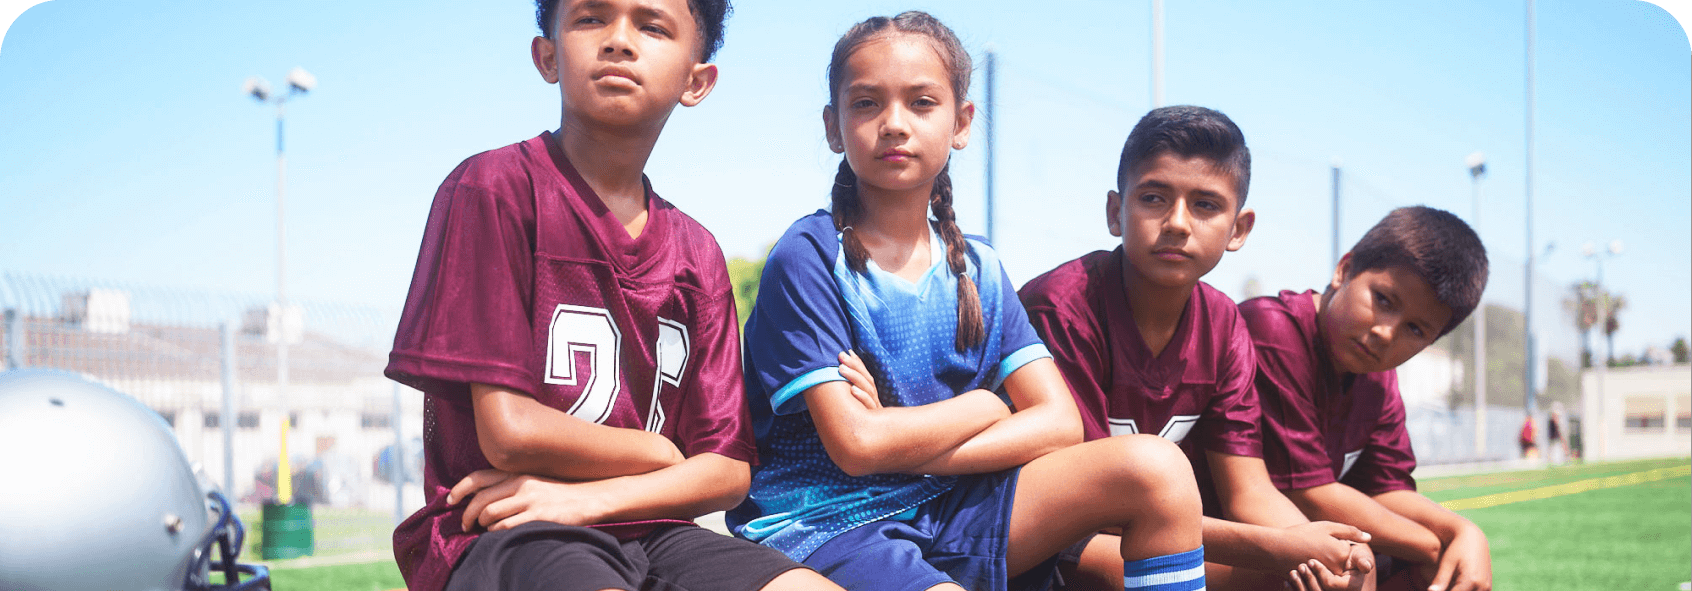 A group of Hispanic and Latino children wearing athletic gear and sitting on an athletic field.